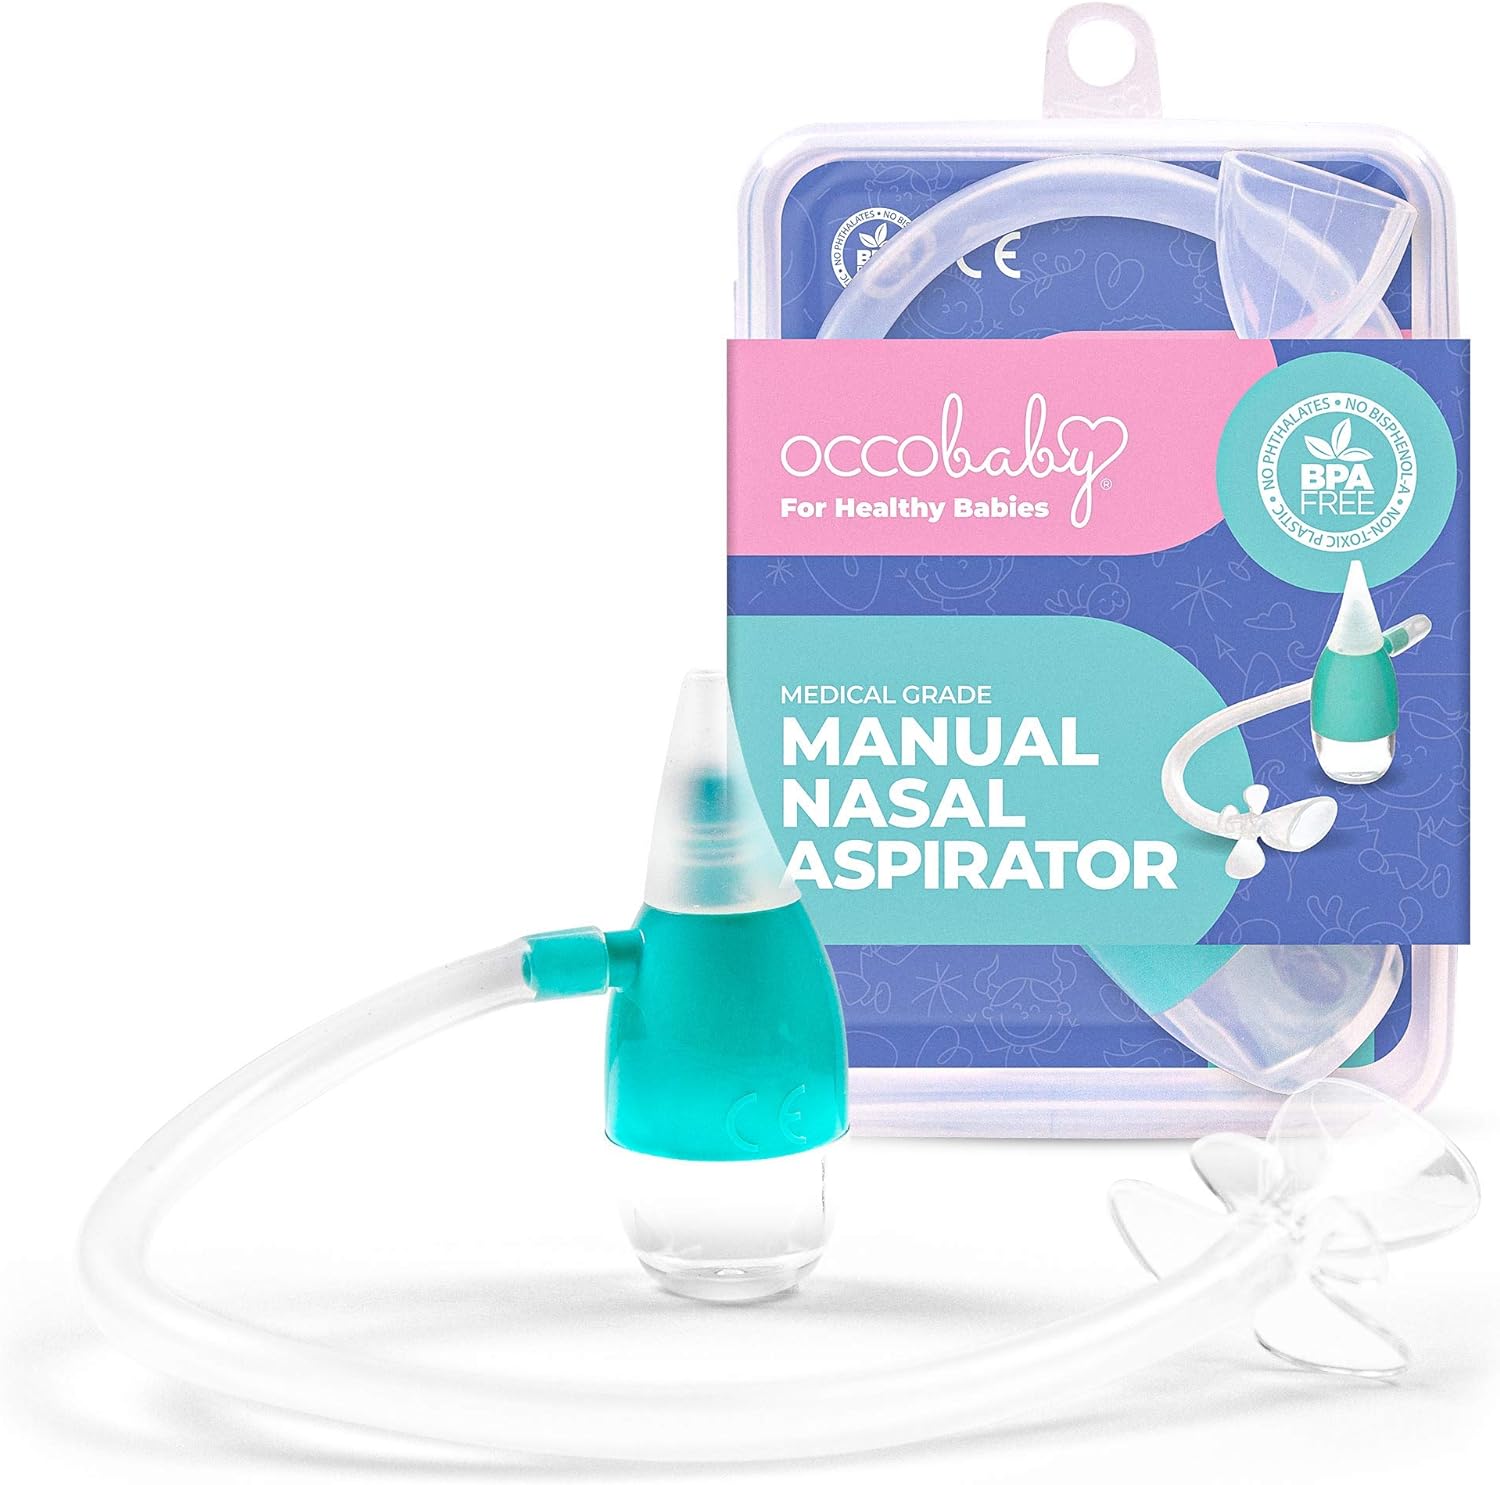 OCCObaby Manual Baby Nasal Aspirator - Nose Sucker for Toddlers and Newborns - Baby Congestion Relief - Aspirador Nasal para Bebes - Baby Nose Aspirator for Runny Nose Relief for Toddlers and Infants